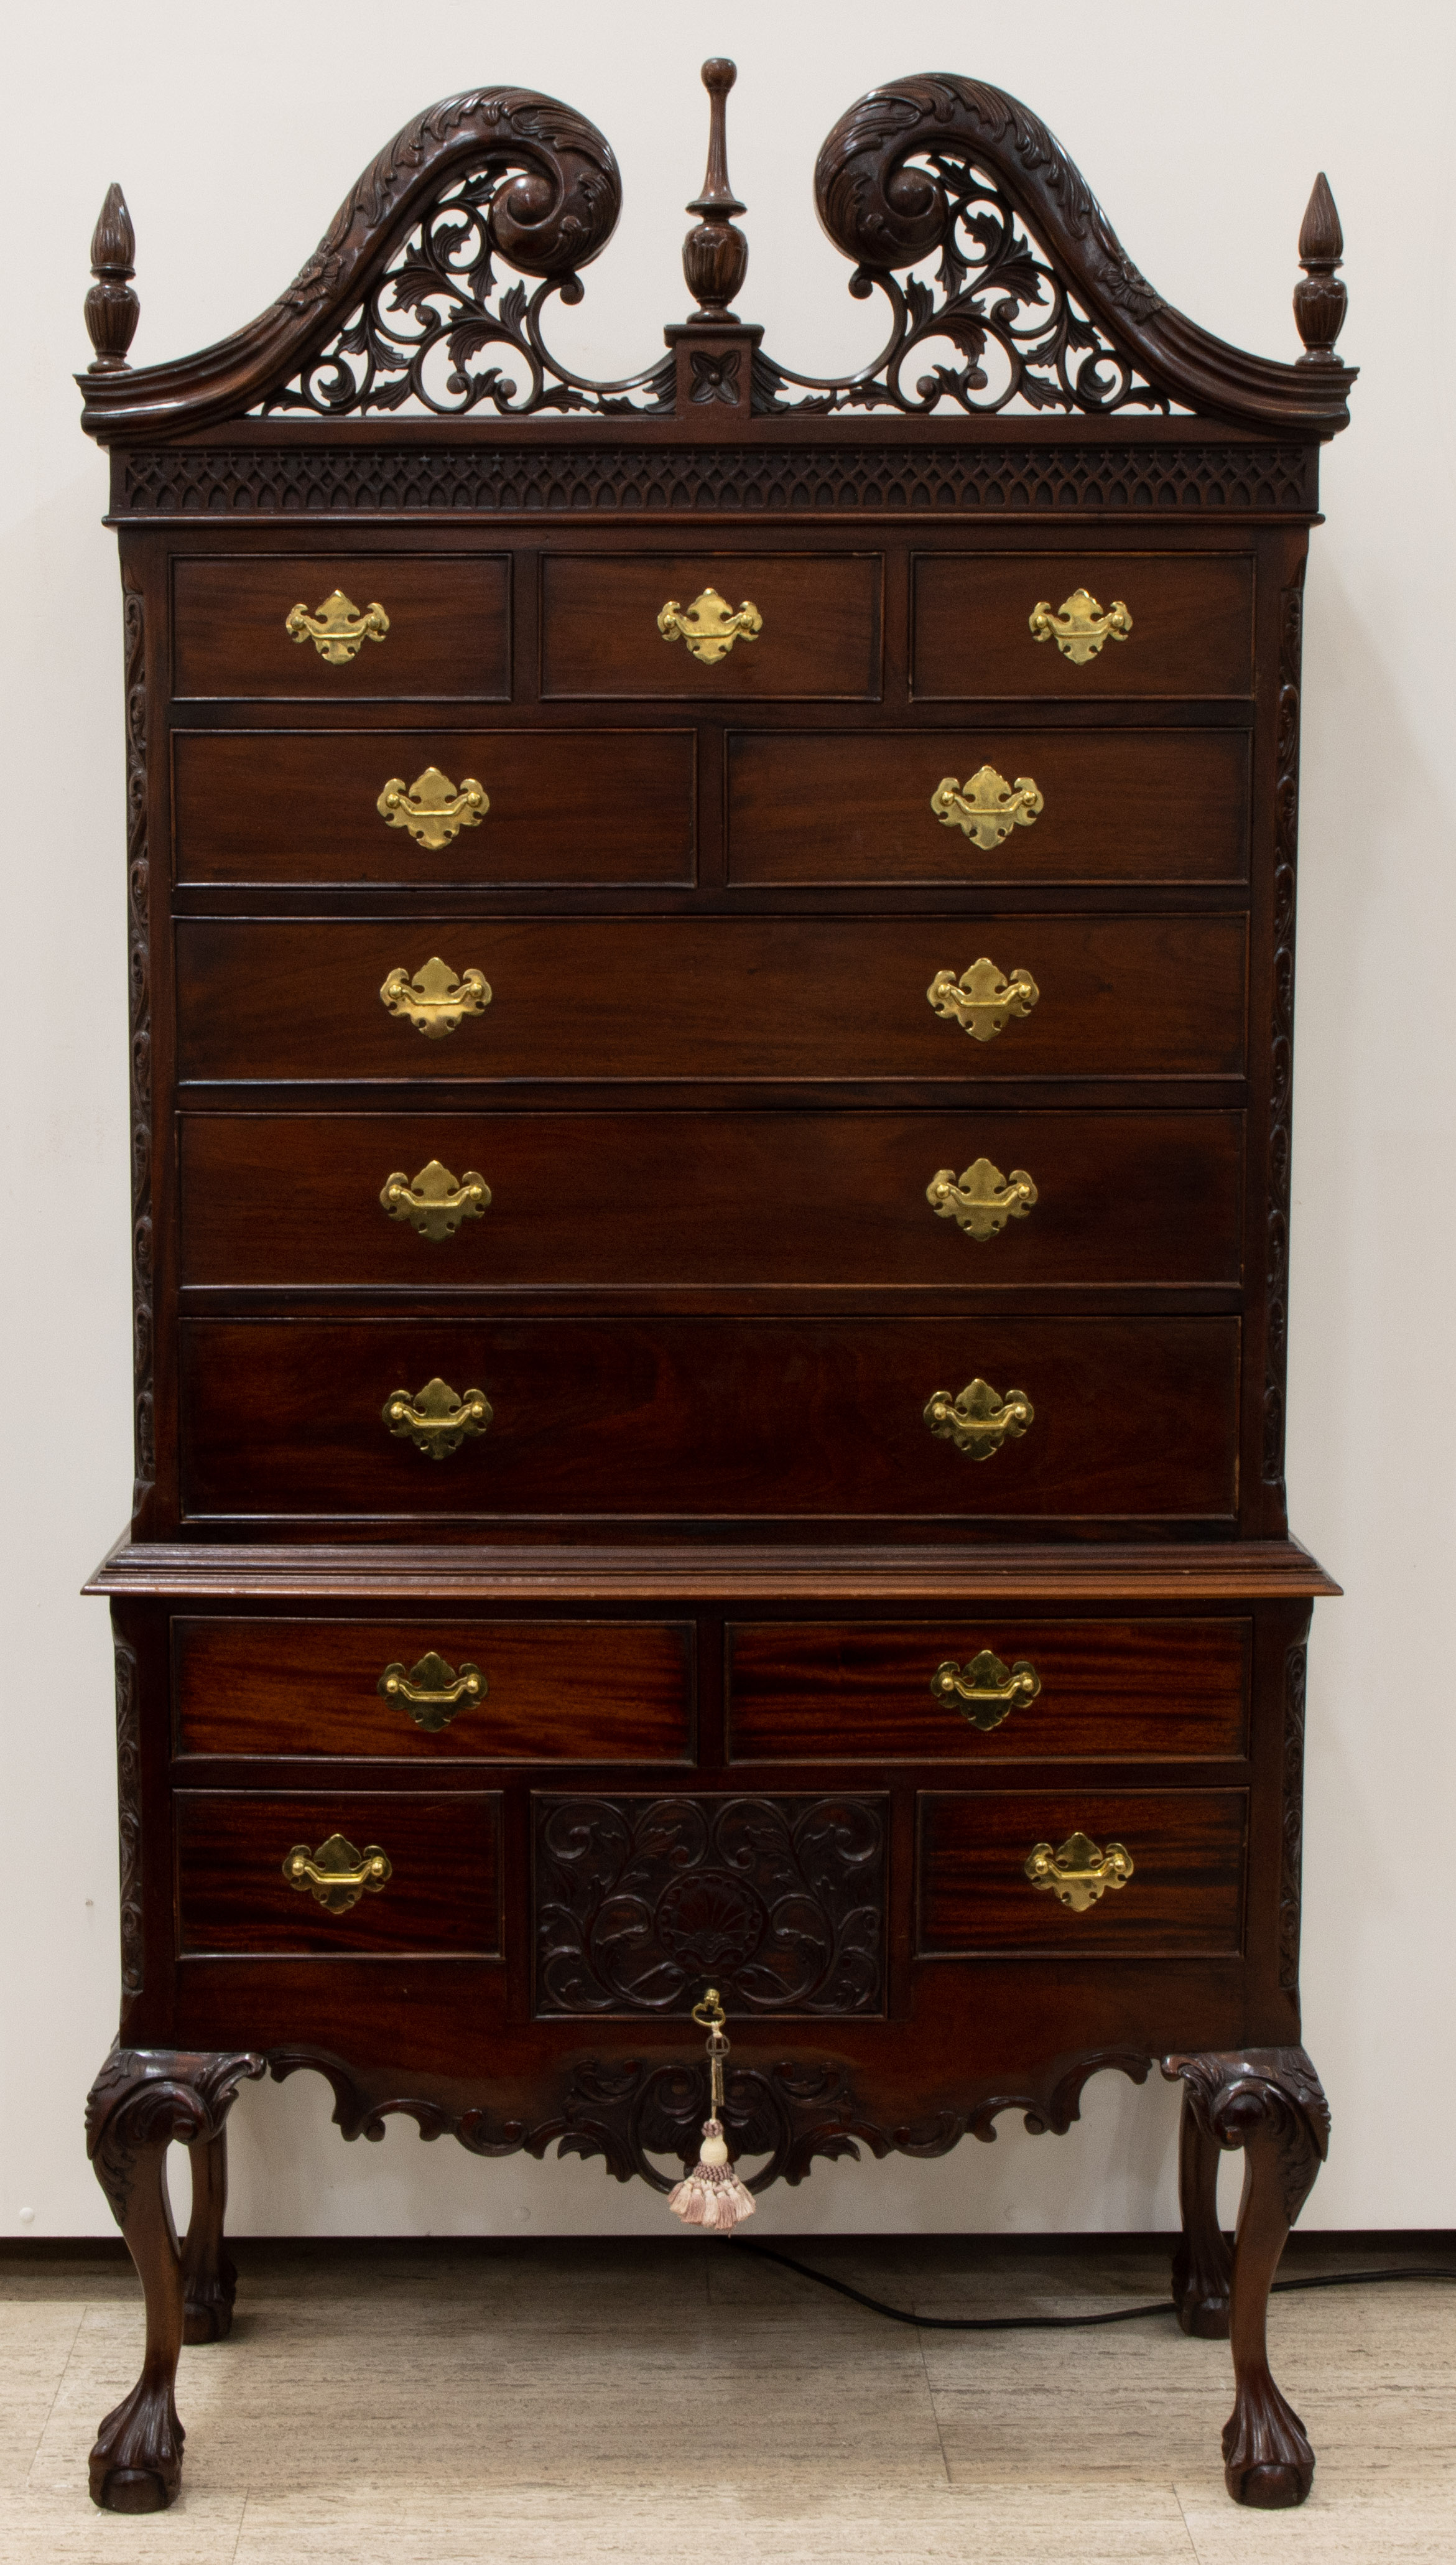 High chest of drawers in mahogany Chippendale style - Image 2 of 2